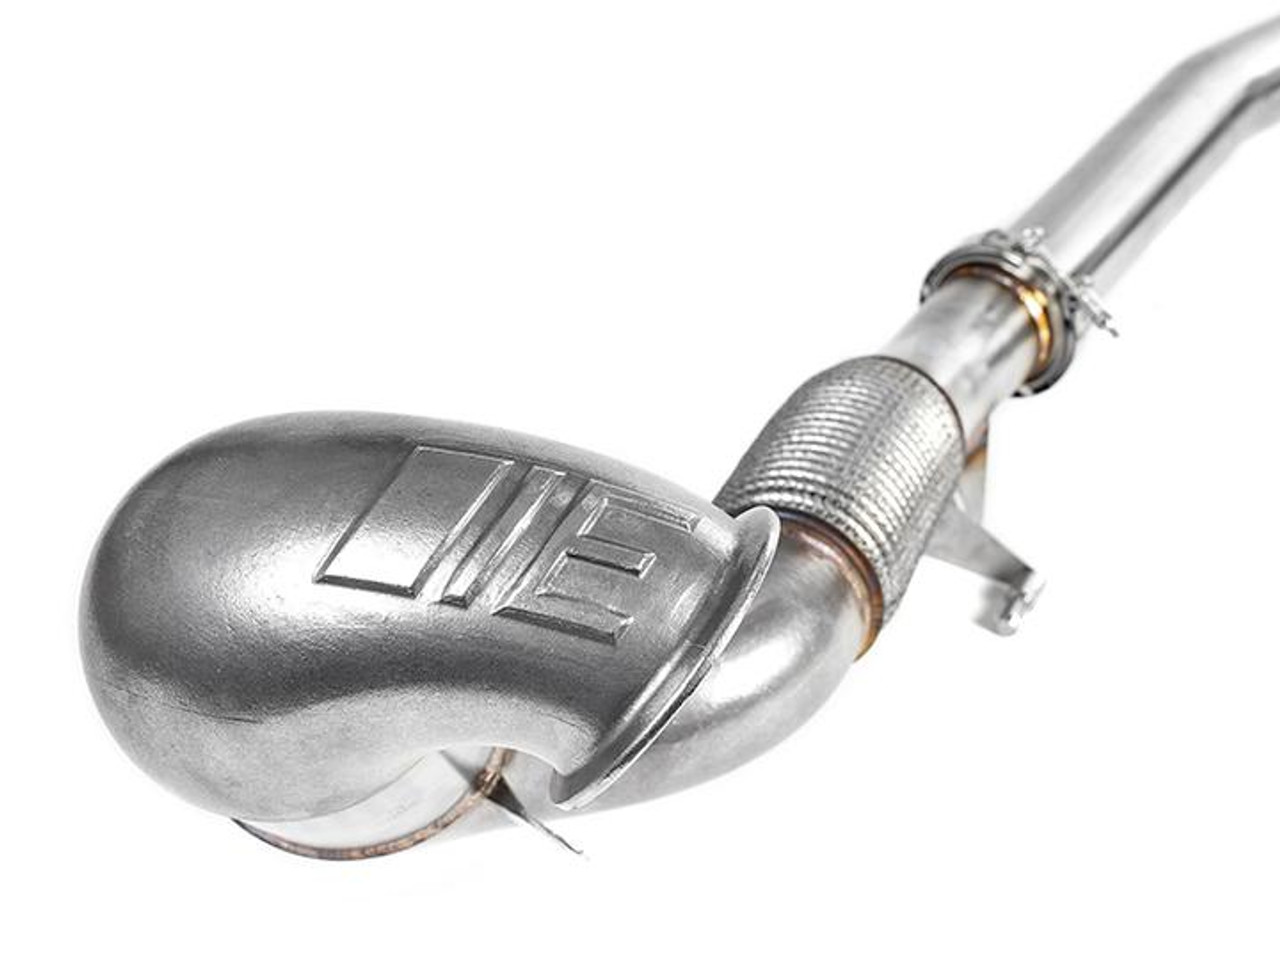 IE Cast Downpipe (Catted) For 2.0T AWD  Fits MQB MK7/MK7.5 Golf R & Audi 8V/8S  A3, S3, TT, TTS (Free Shipping!) - WCT Performance Canada